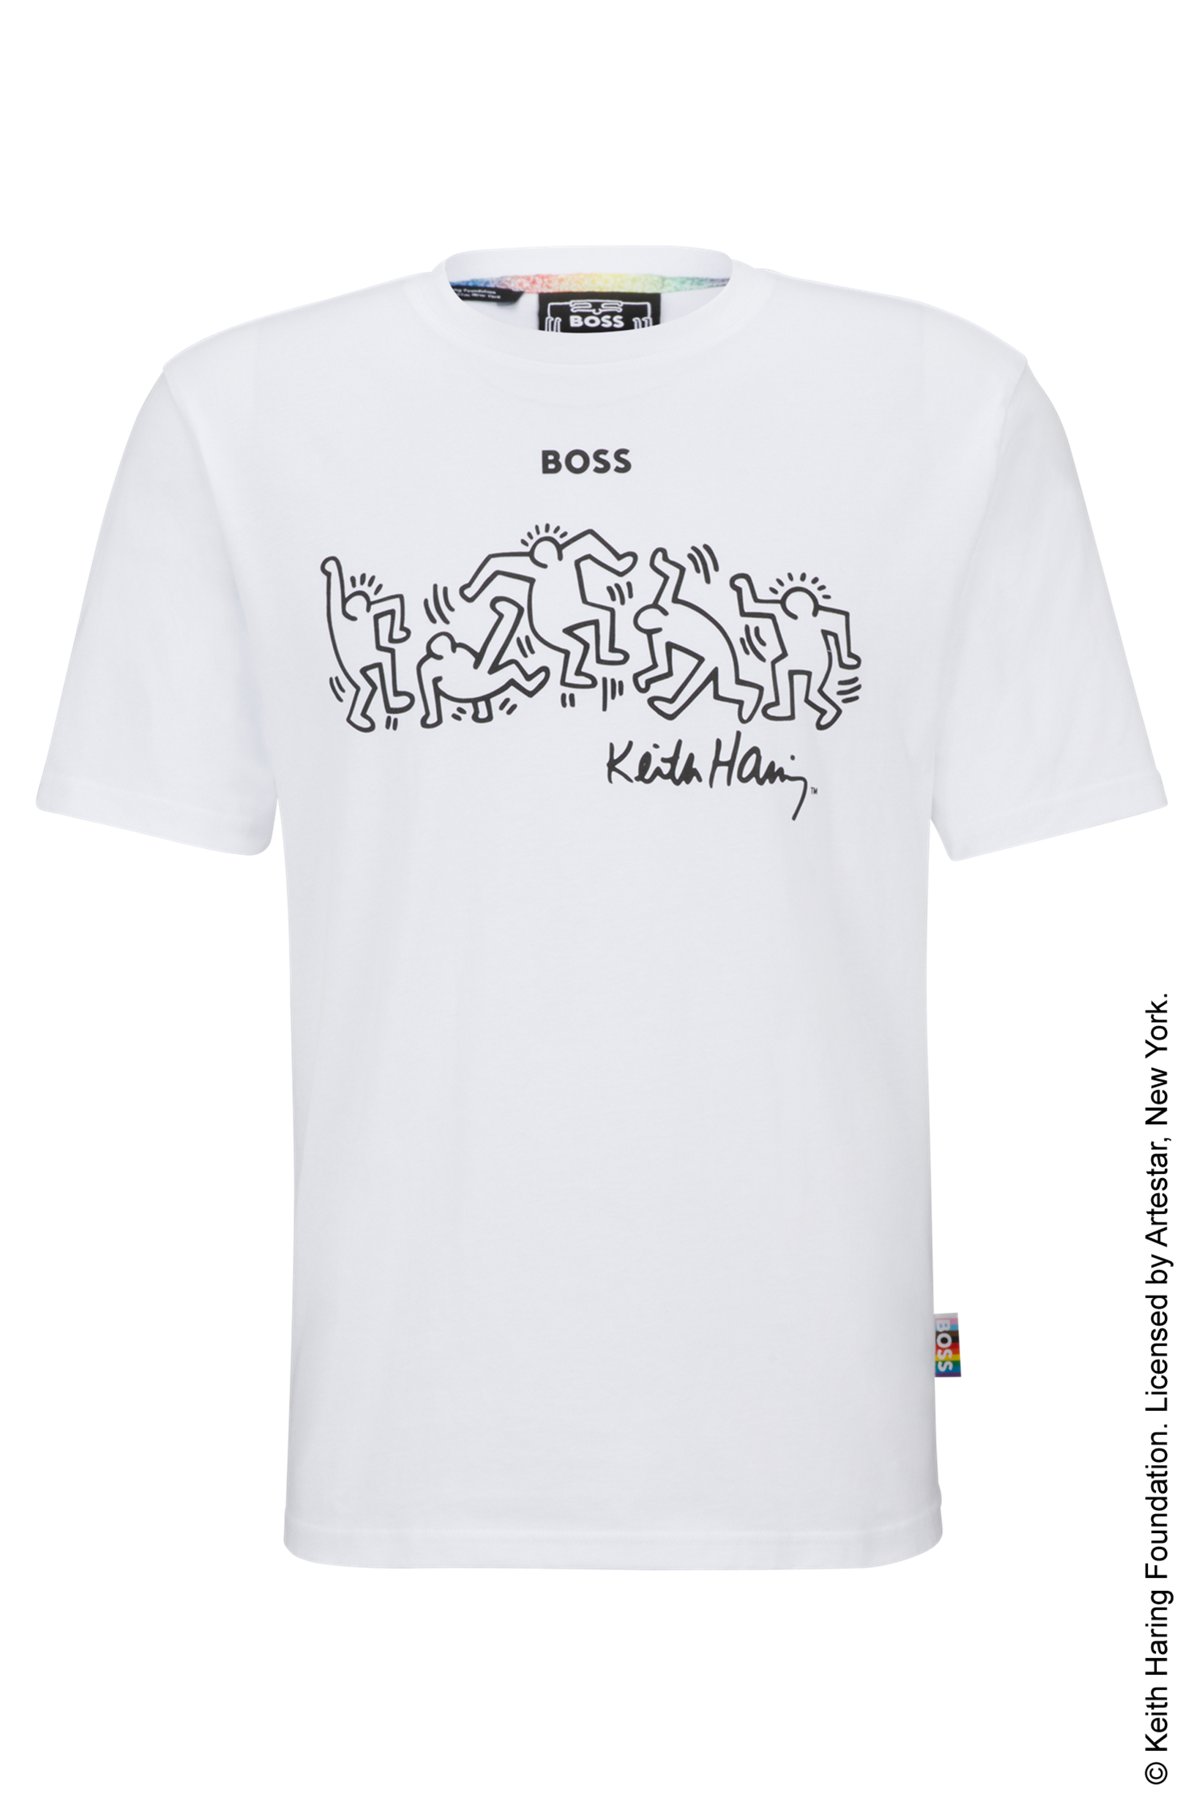 BOSS x Keith Haring gender-neutral T-shirt with special logo artwork, White